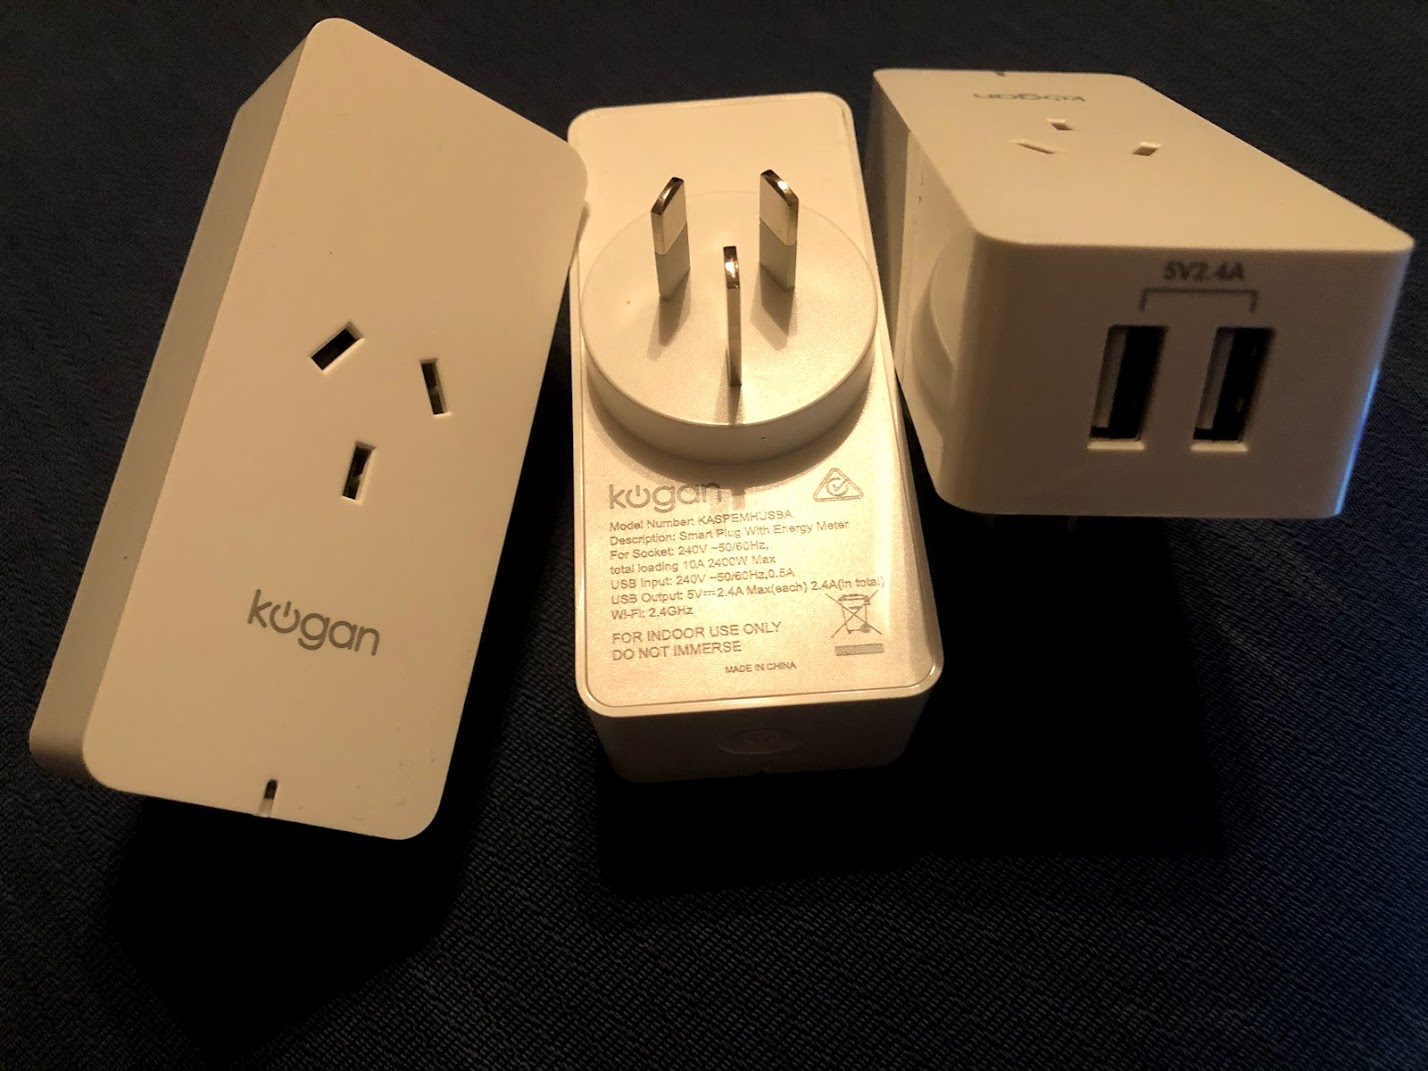 Three smart plugs. There are two USB-A chargers on the bottom.